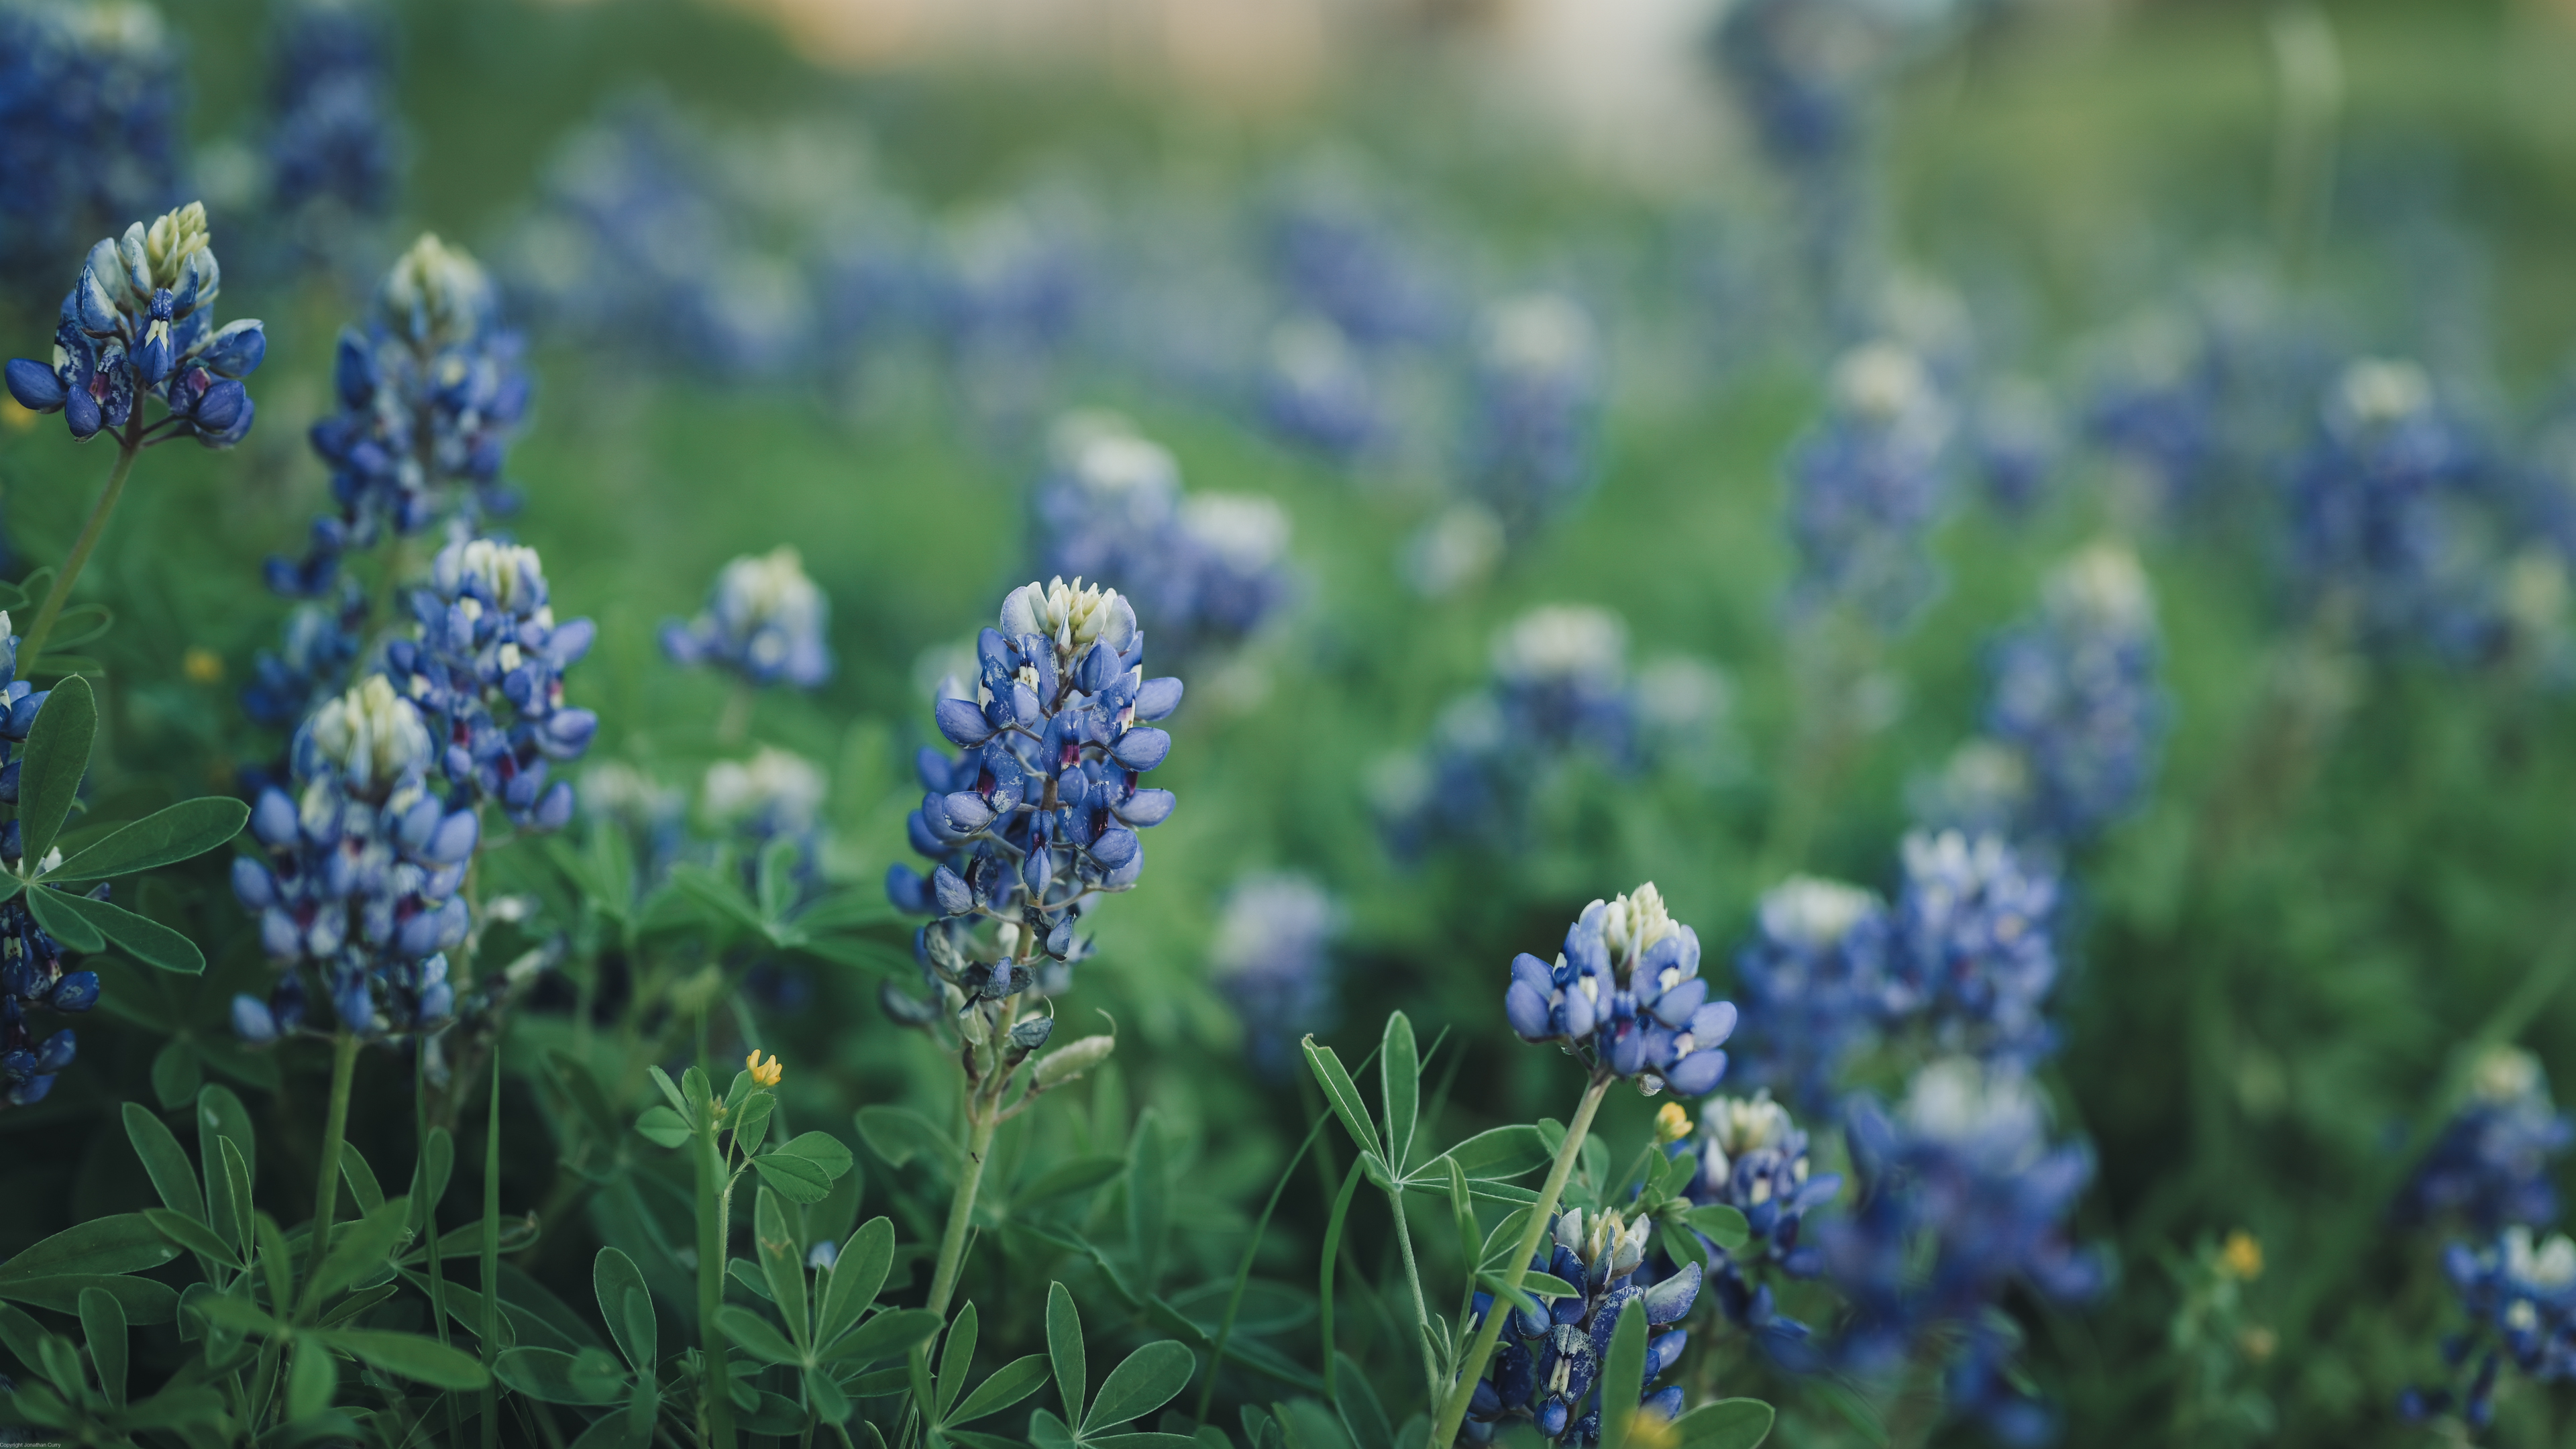 General 3840x2160 flowers Texas Bluebonnet Flowers nature photography plants outdoors bokeh leaves blue 4K muted blurred blurry background lupines Jonathan Curry